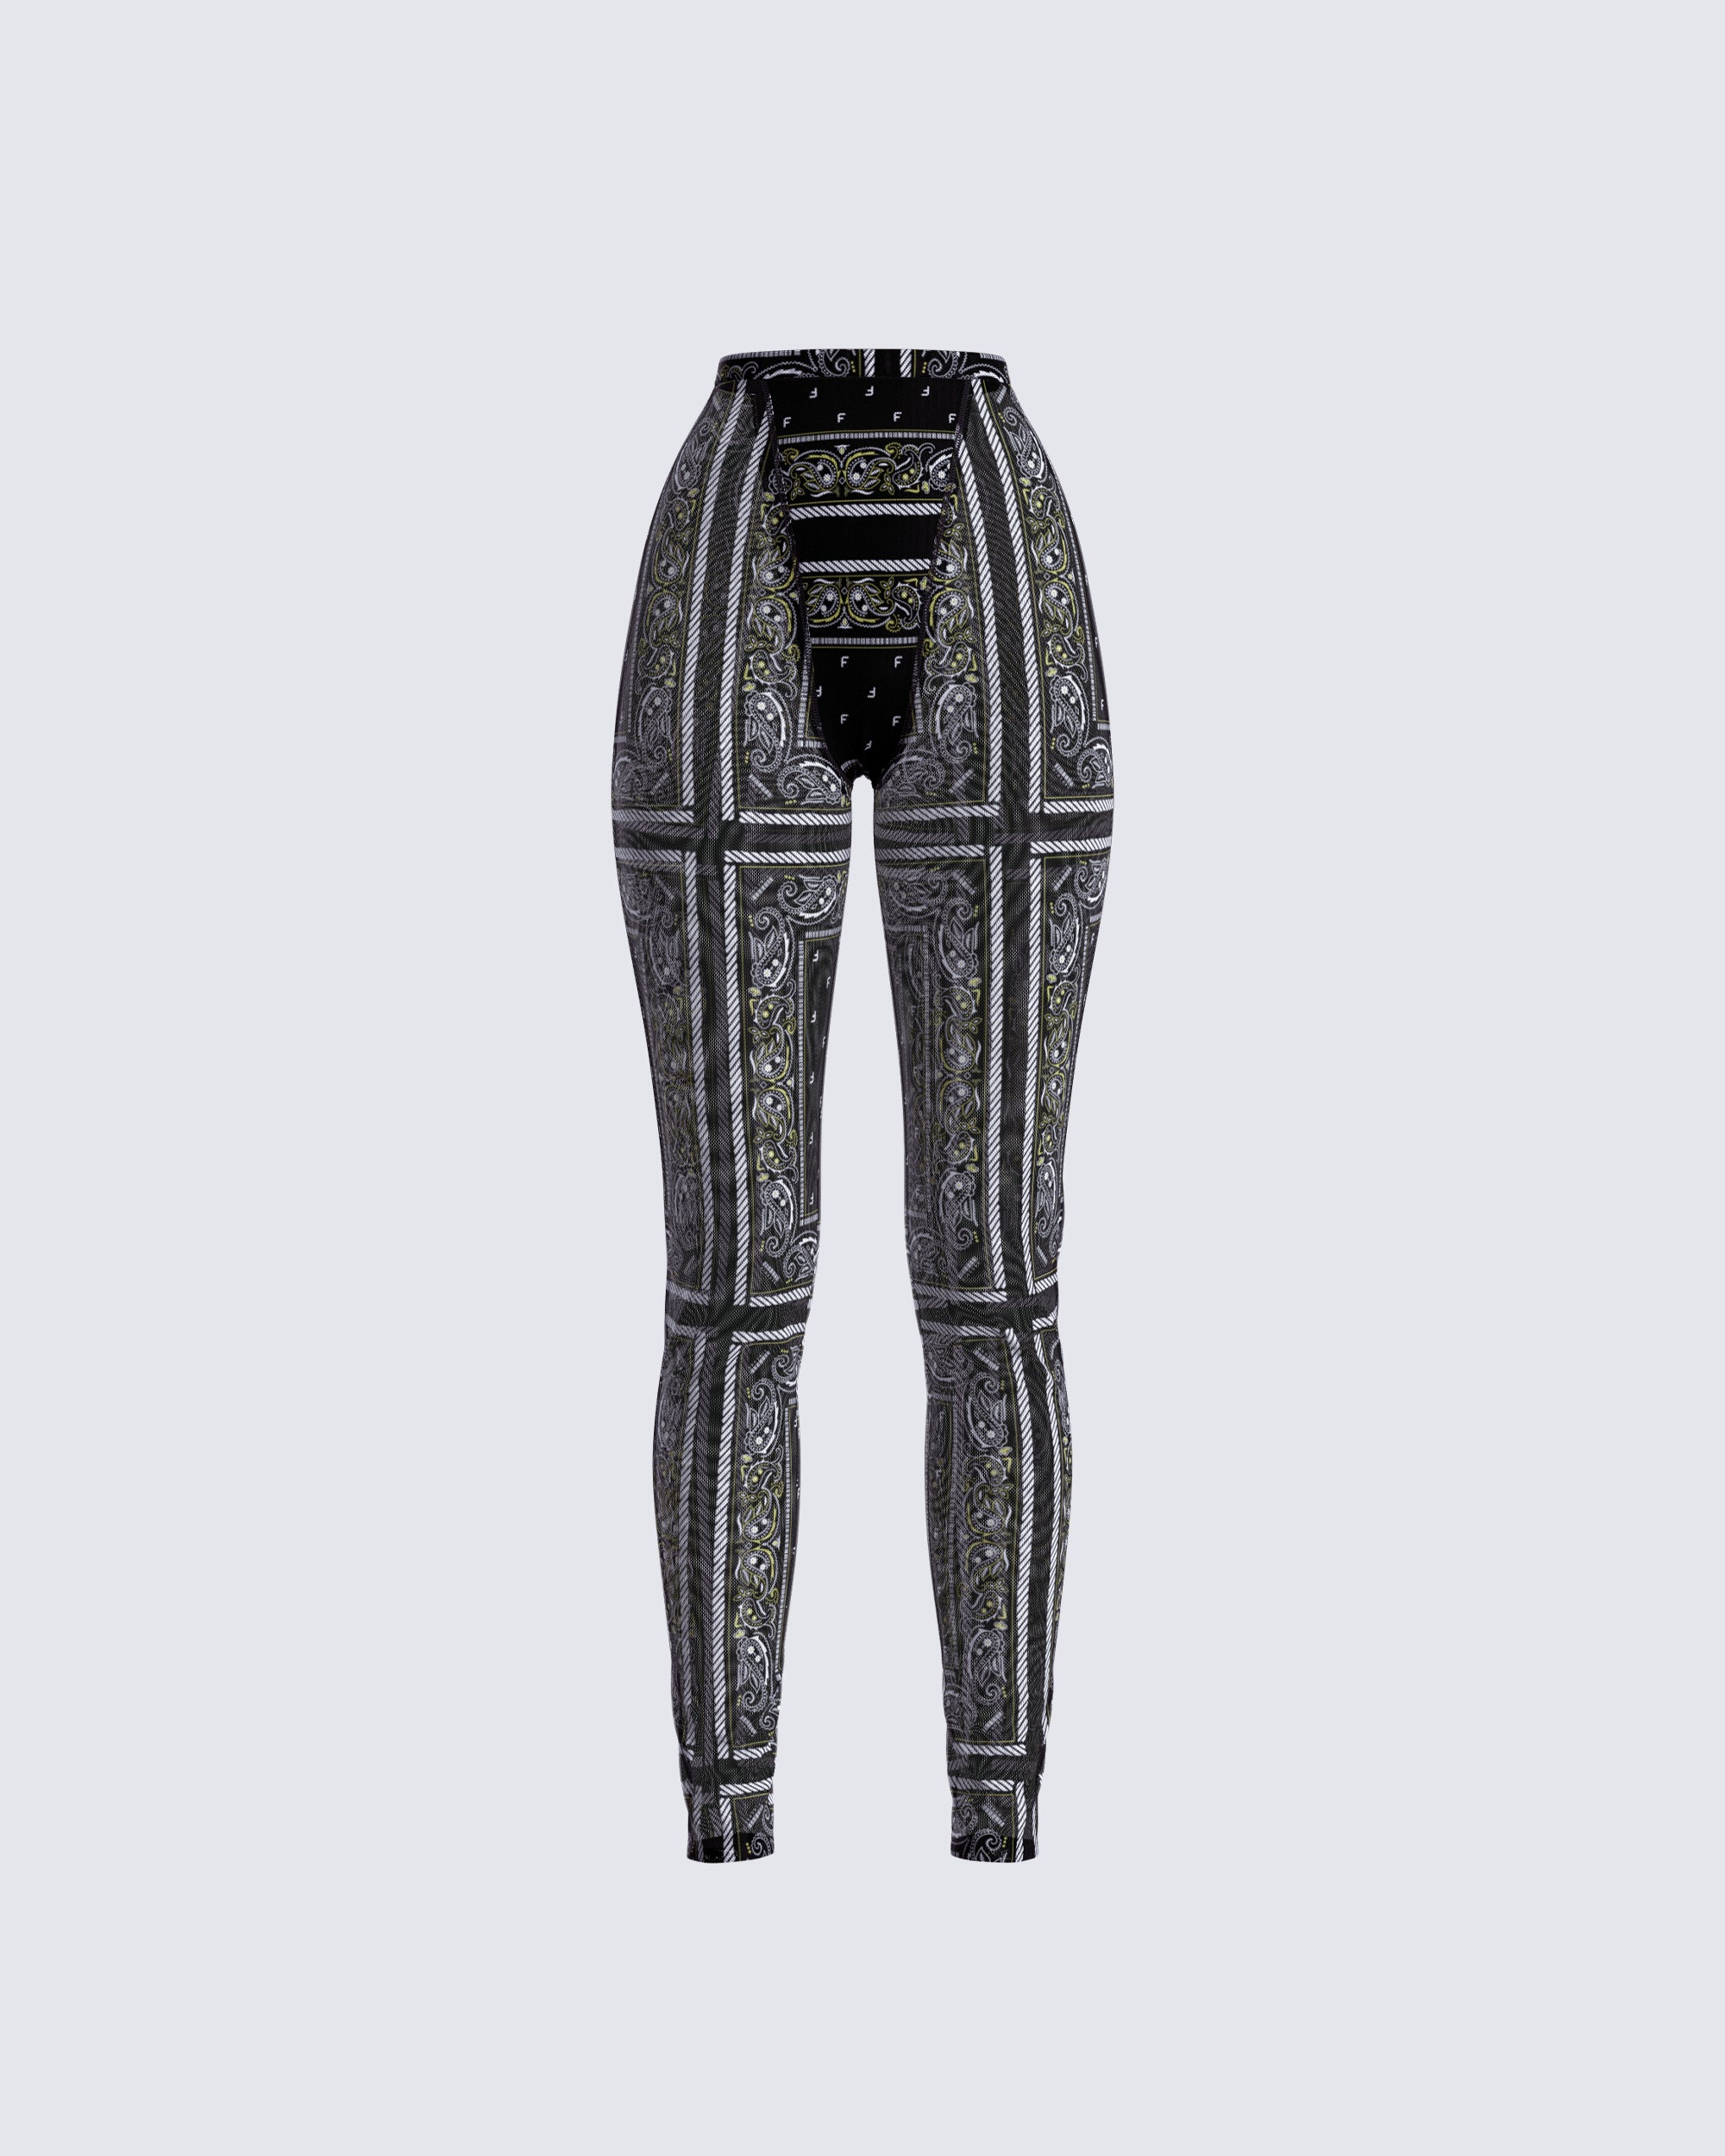 Kliou Mesh Patchwork Print Leggings Women Hipster Y2K Stitching Color Match  Sheath Pants High Waist Body Shaping Streetwear 211215 From Luo02, $13.07 |  DHgate.Com